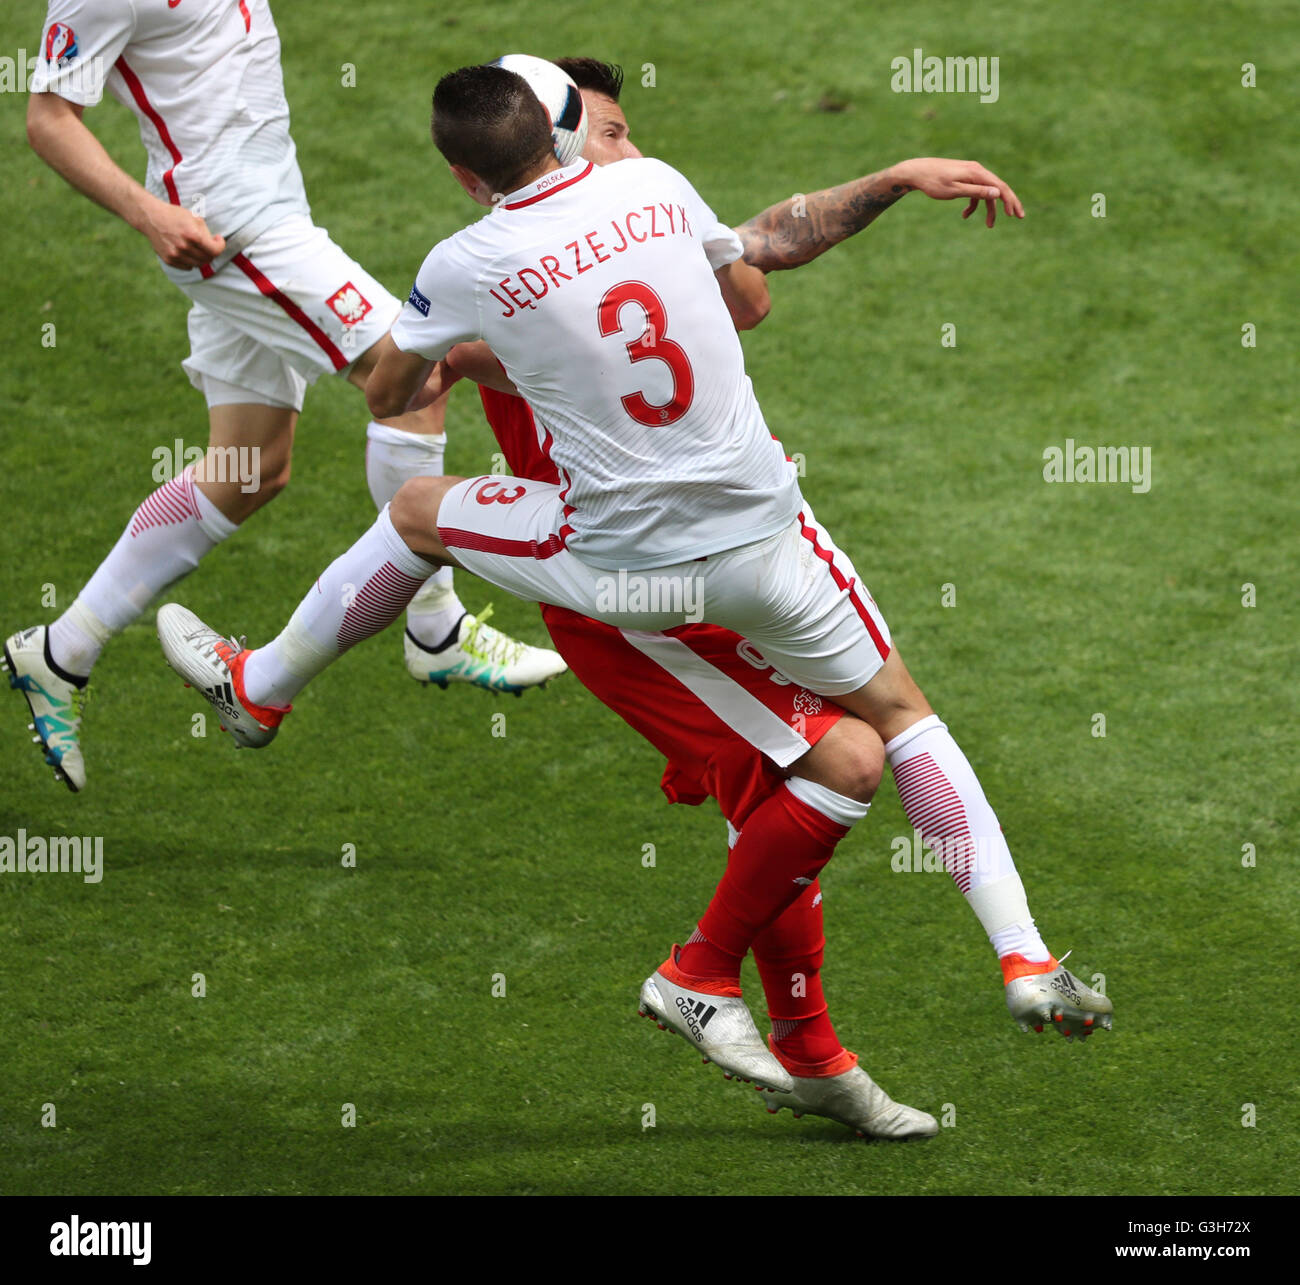 Saint-Etienne, France. 25th June, 2016. Poland's Artur Jedrzejczyk(Front) competes during the Euro 2016 round of sixteen football match between Switzerland and Poland in Saint-Etienne on June 25, 2016. (Xinhua/Bai Xuefei) Credit:  Xinhua/Alamy Live News Stock Photo